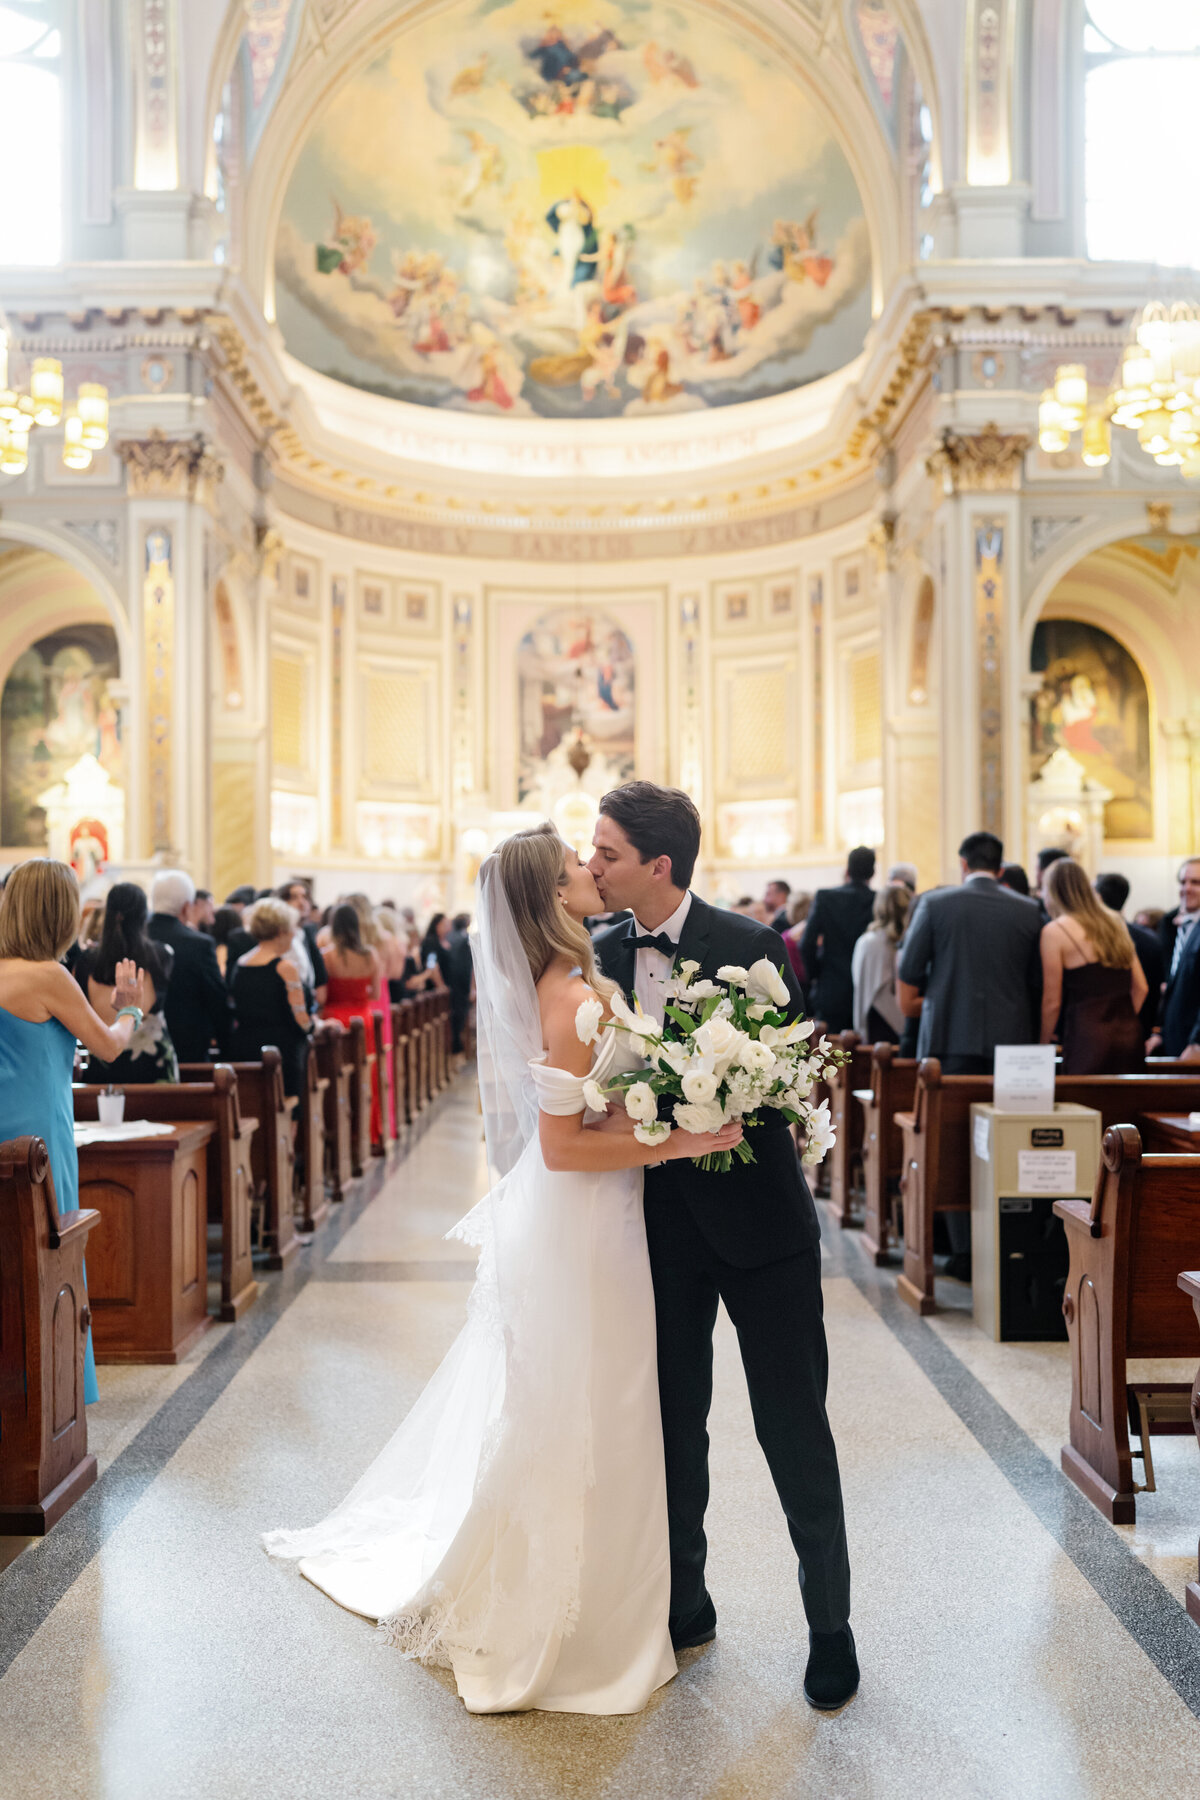 Aspen-Avenue-Chicago-Wedding-Photographer-Chicago-Athletic-Association-Simplicitee-XO-Design-Co-St-Mary-of-the-Angels-Church-Anomalie-Beauty-Timeless-Vogue-77